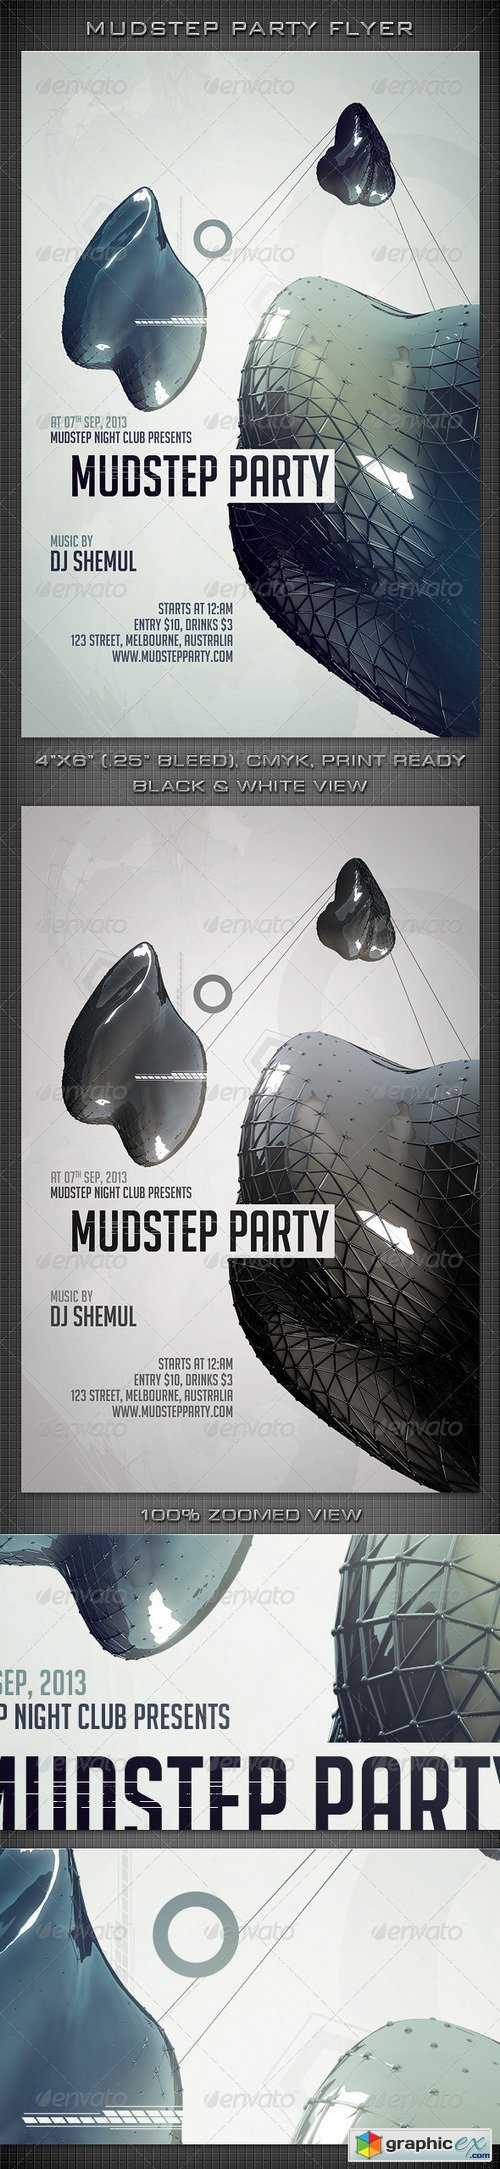 Mudstep Party Flyer